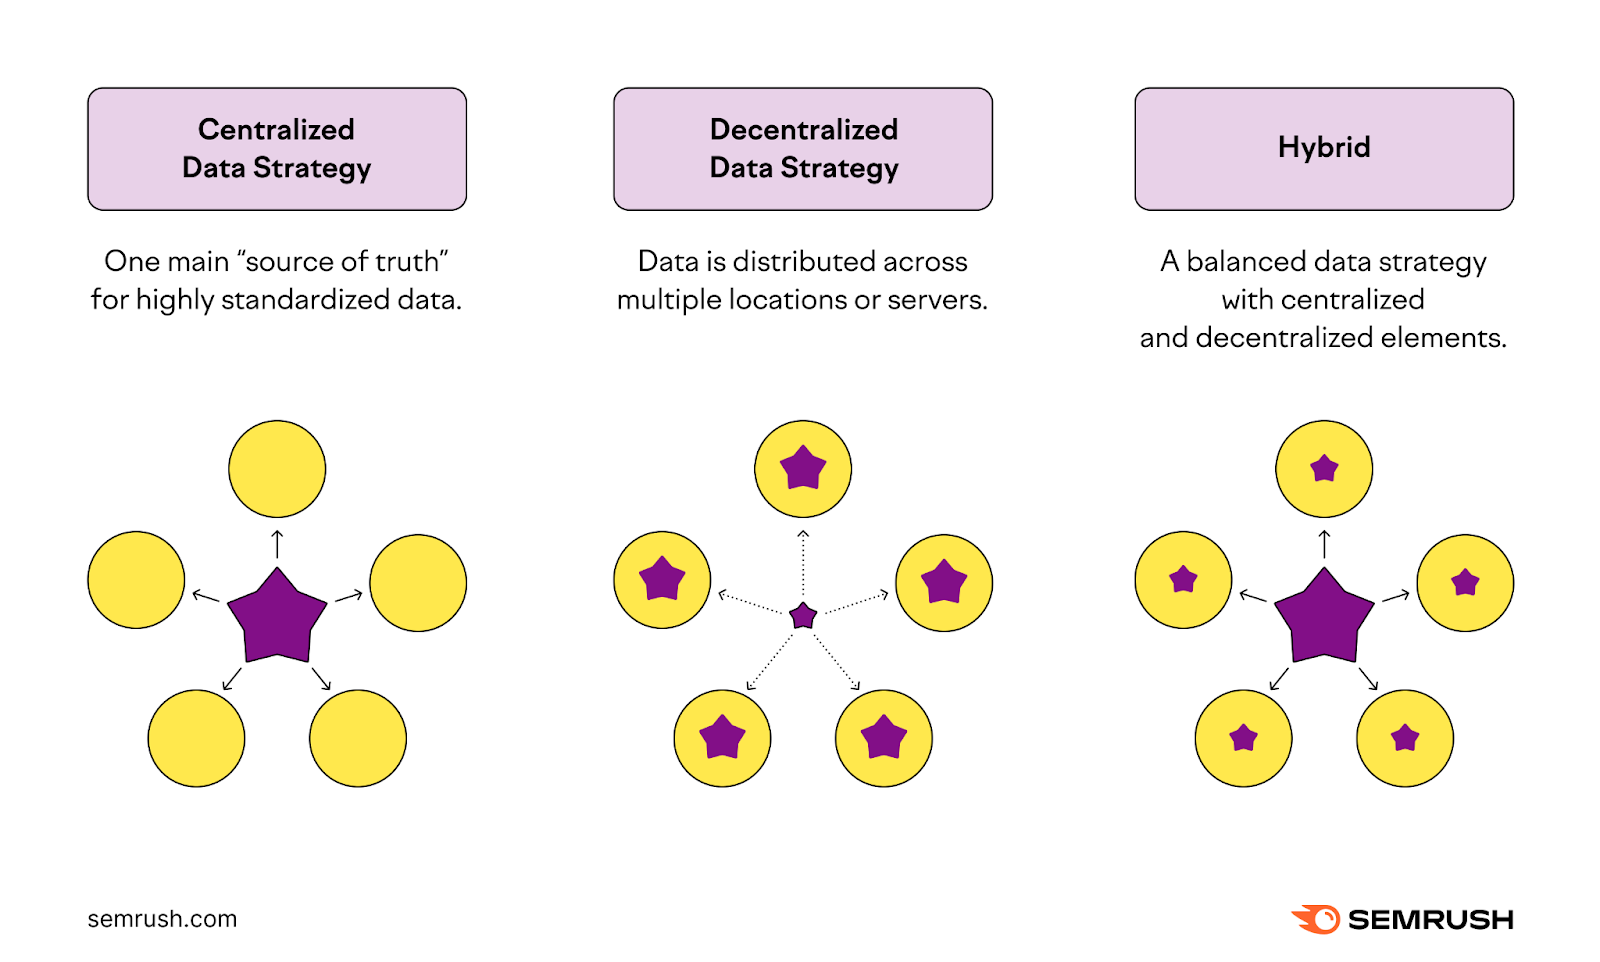 An illustration showing different types of data strategy, including centralized, decentralized, and hybrid strategies